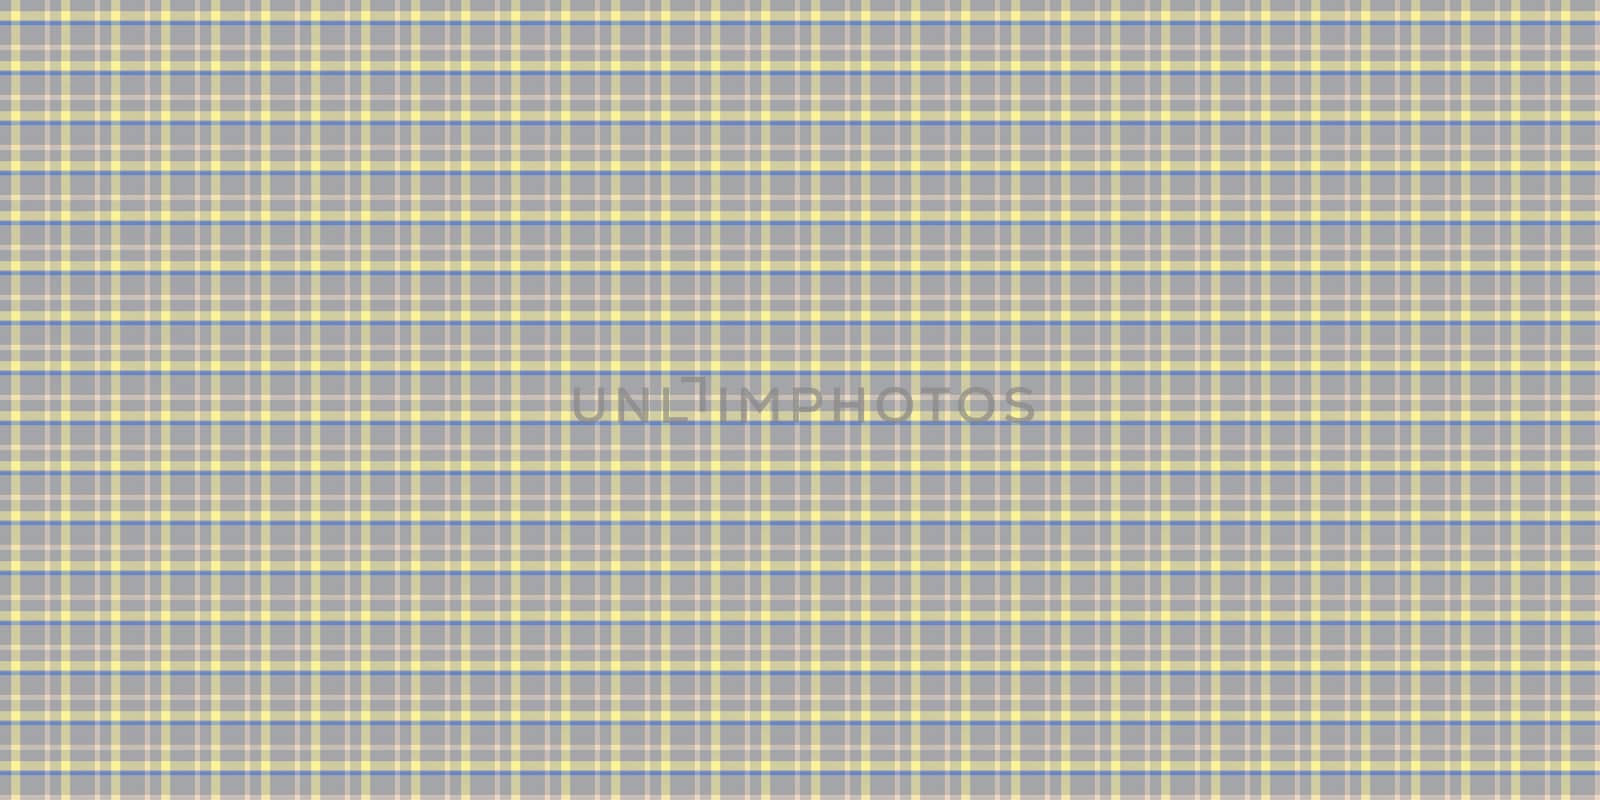 Yellow Seamless Scottish Tartan Background Texture by sanches812